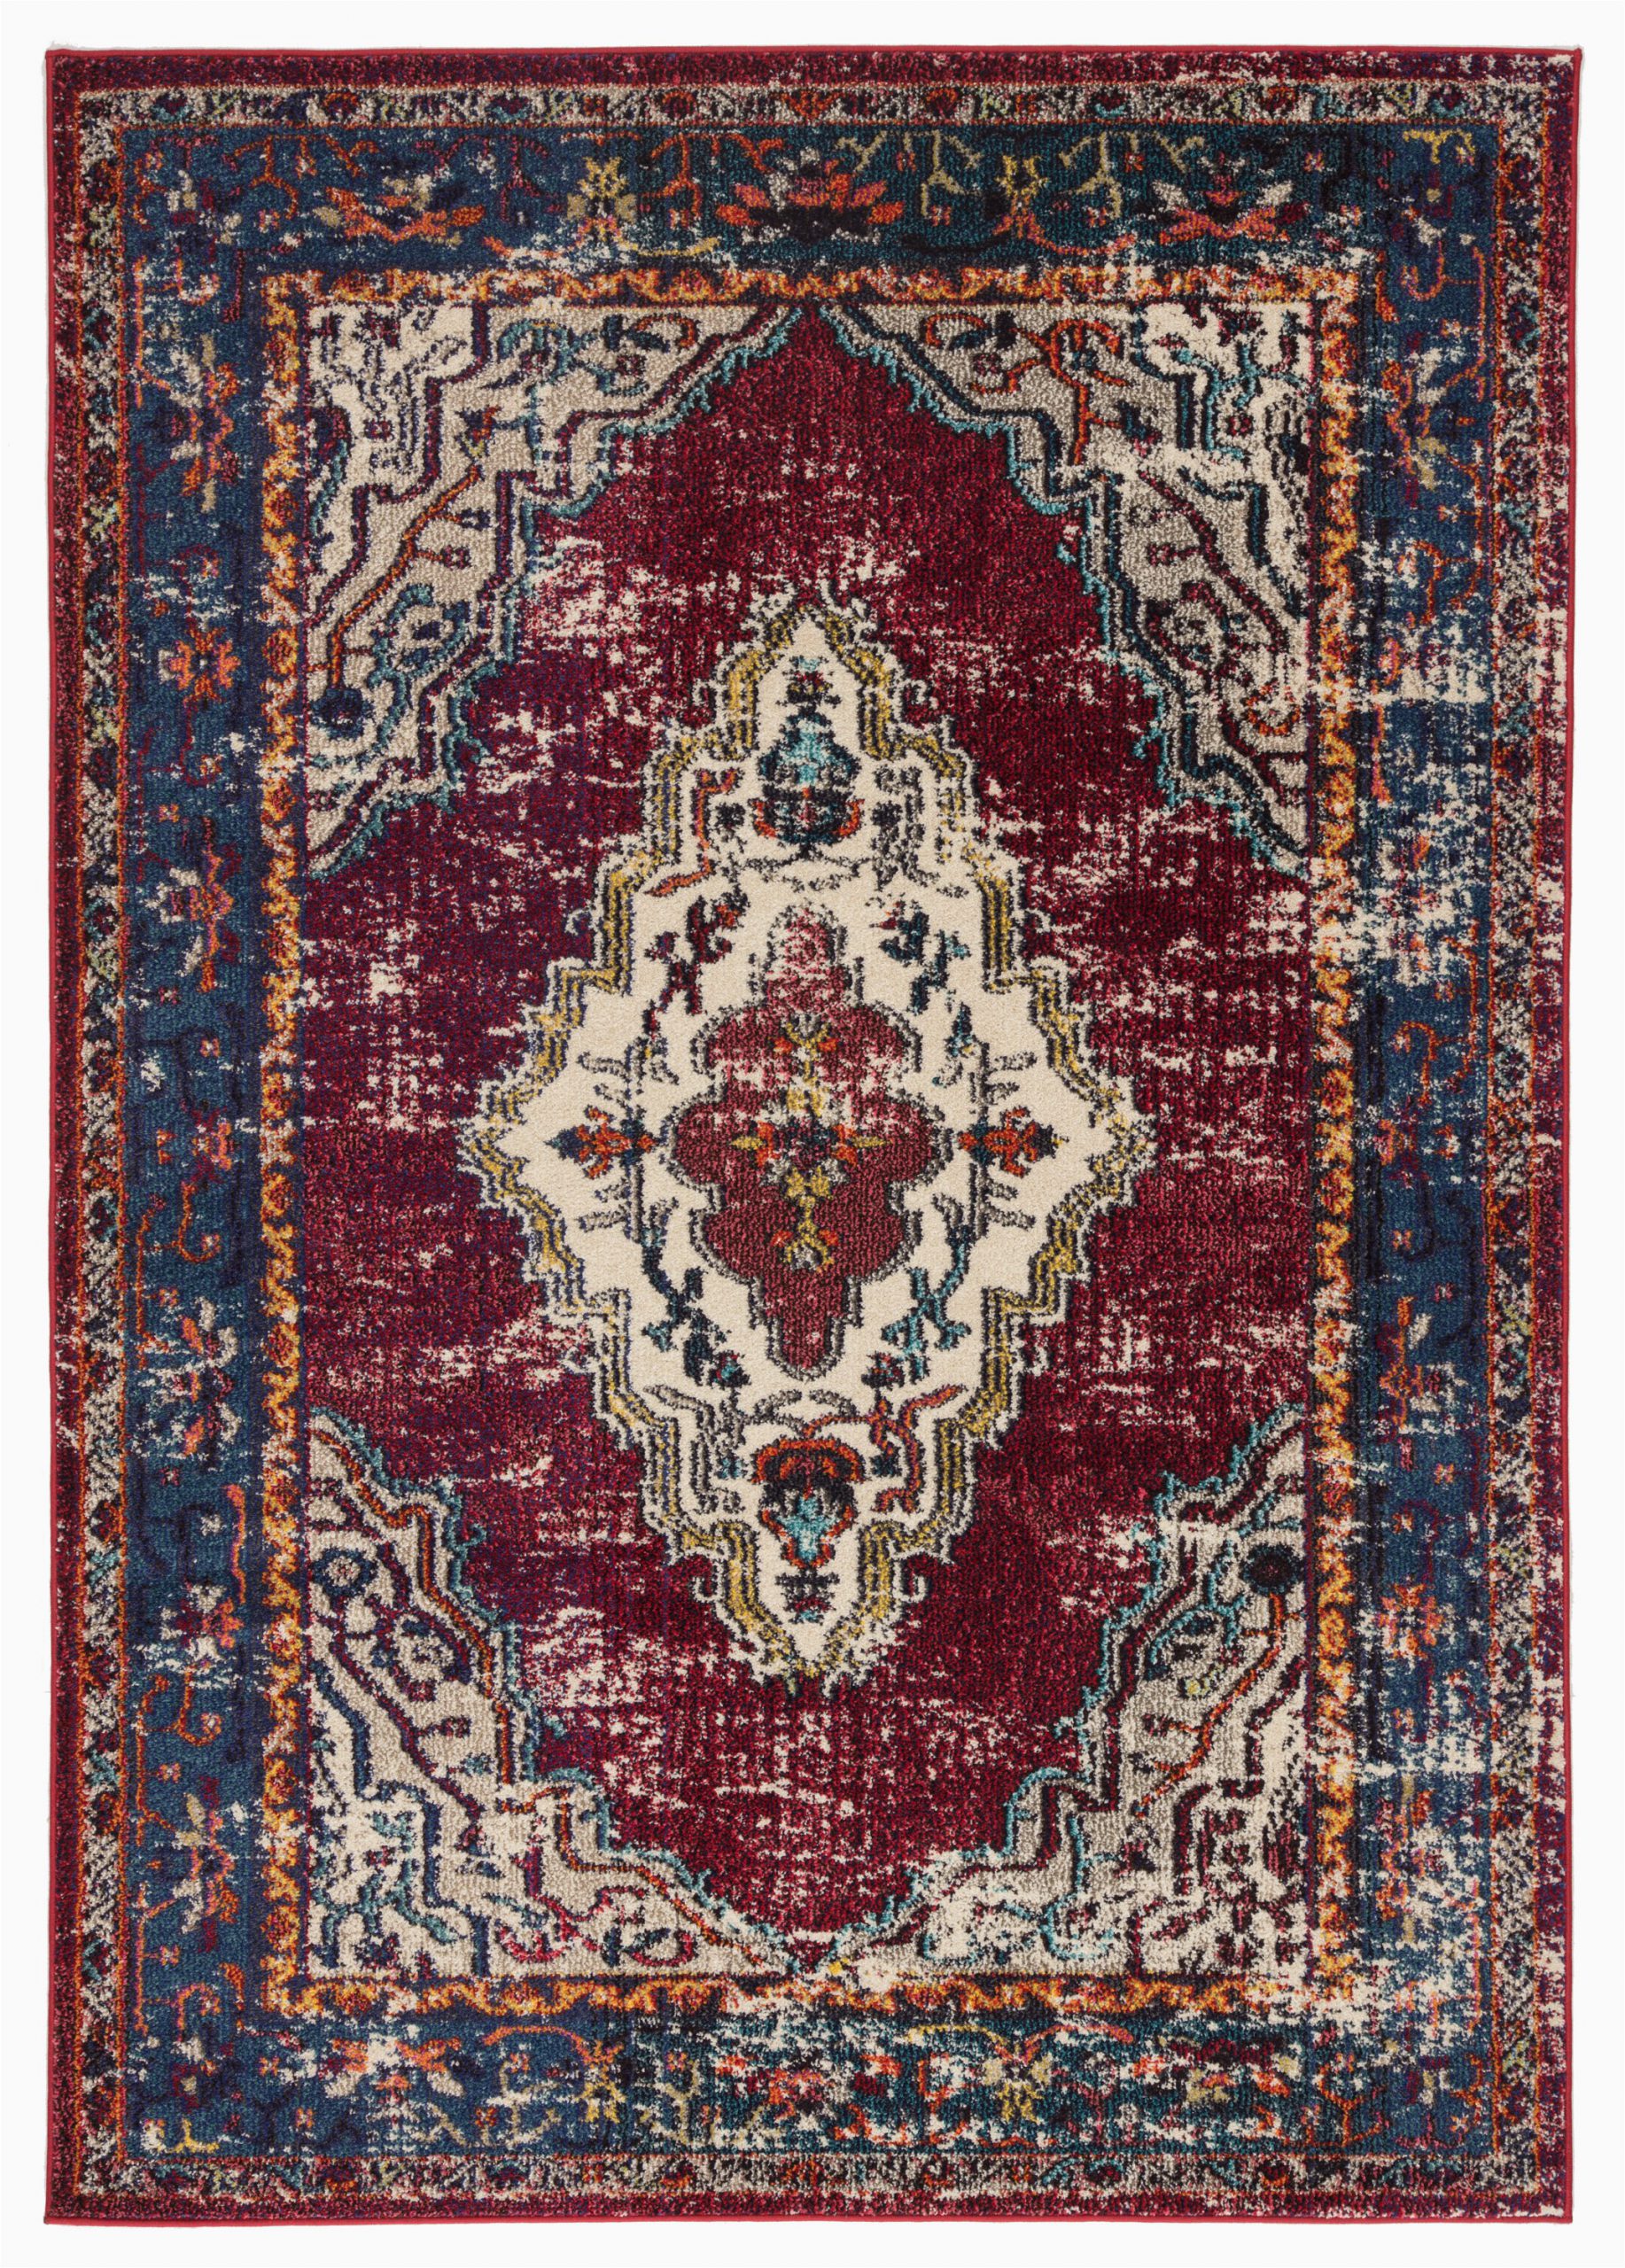 Brown and Maroon area Rugs Avianna Persian Inspired Medallion Maroon Blue Brown area Rug